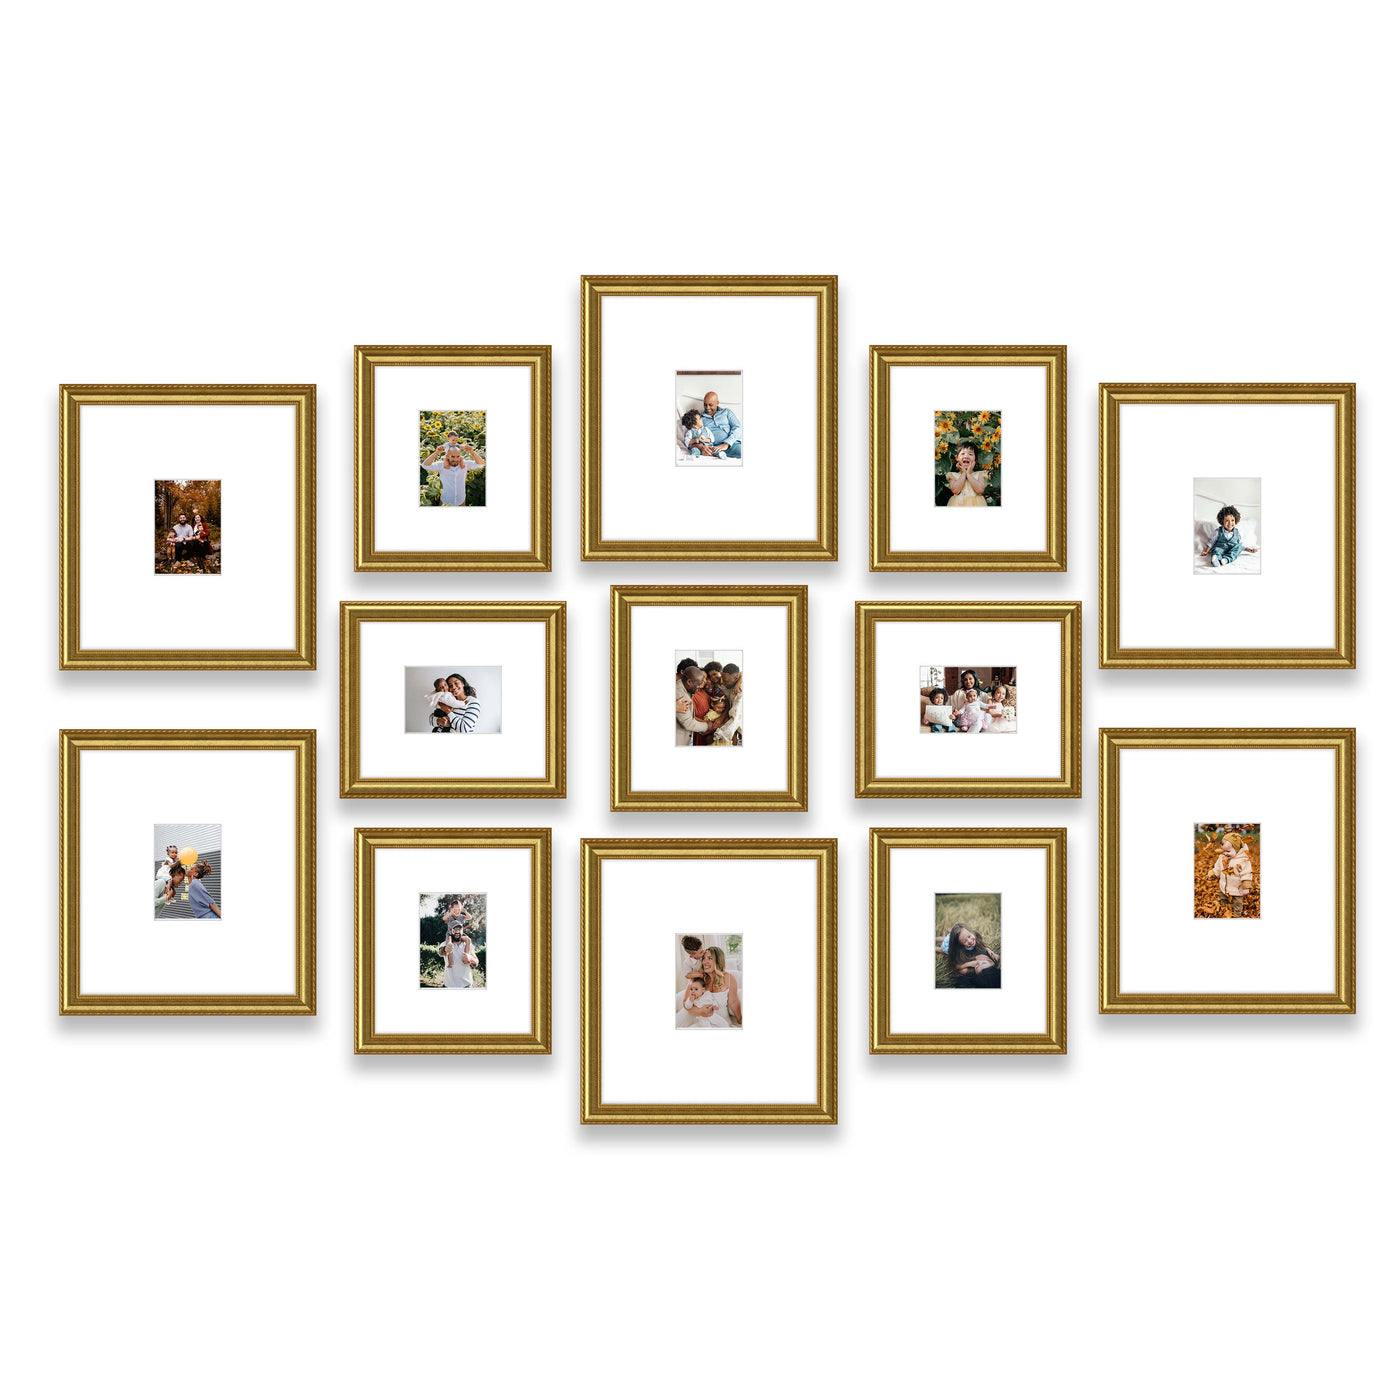 Ornate Wood Frames - Gold - Gallery Walls Made Easy